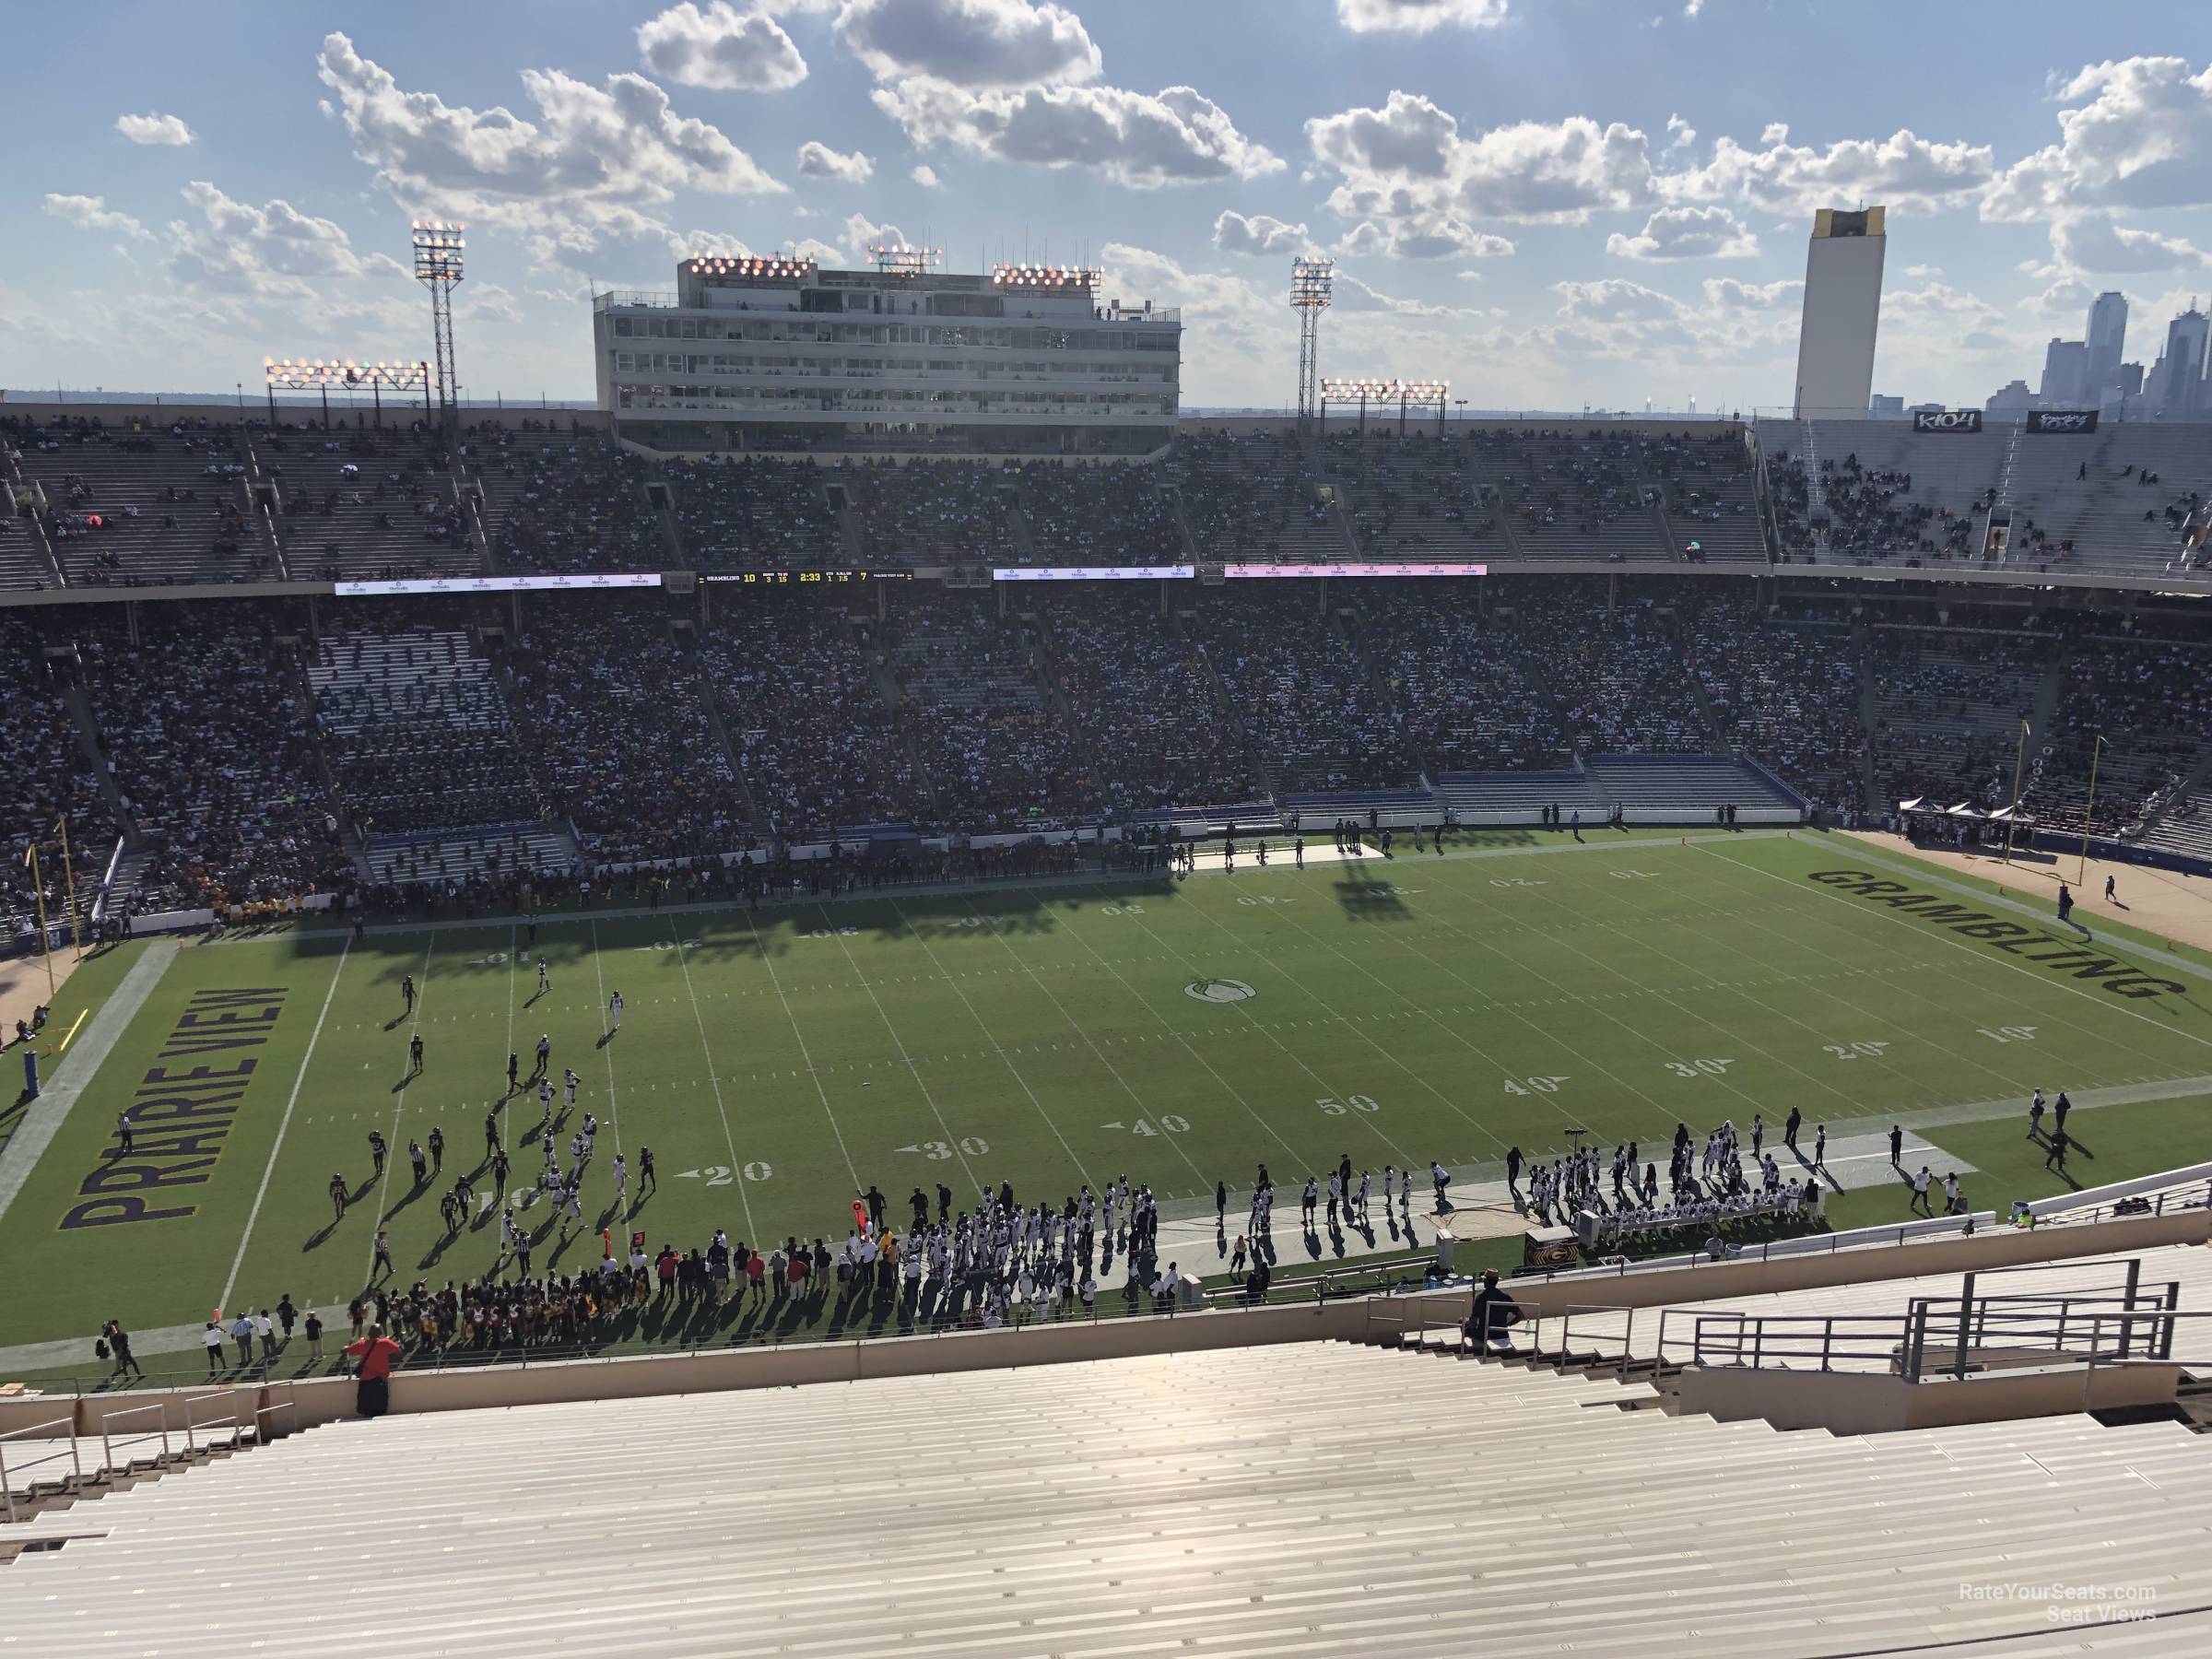 section 130, row 36 seat view  - cotton bowl